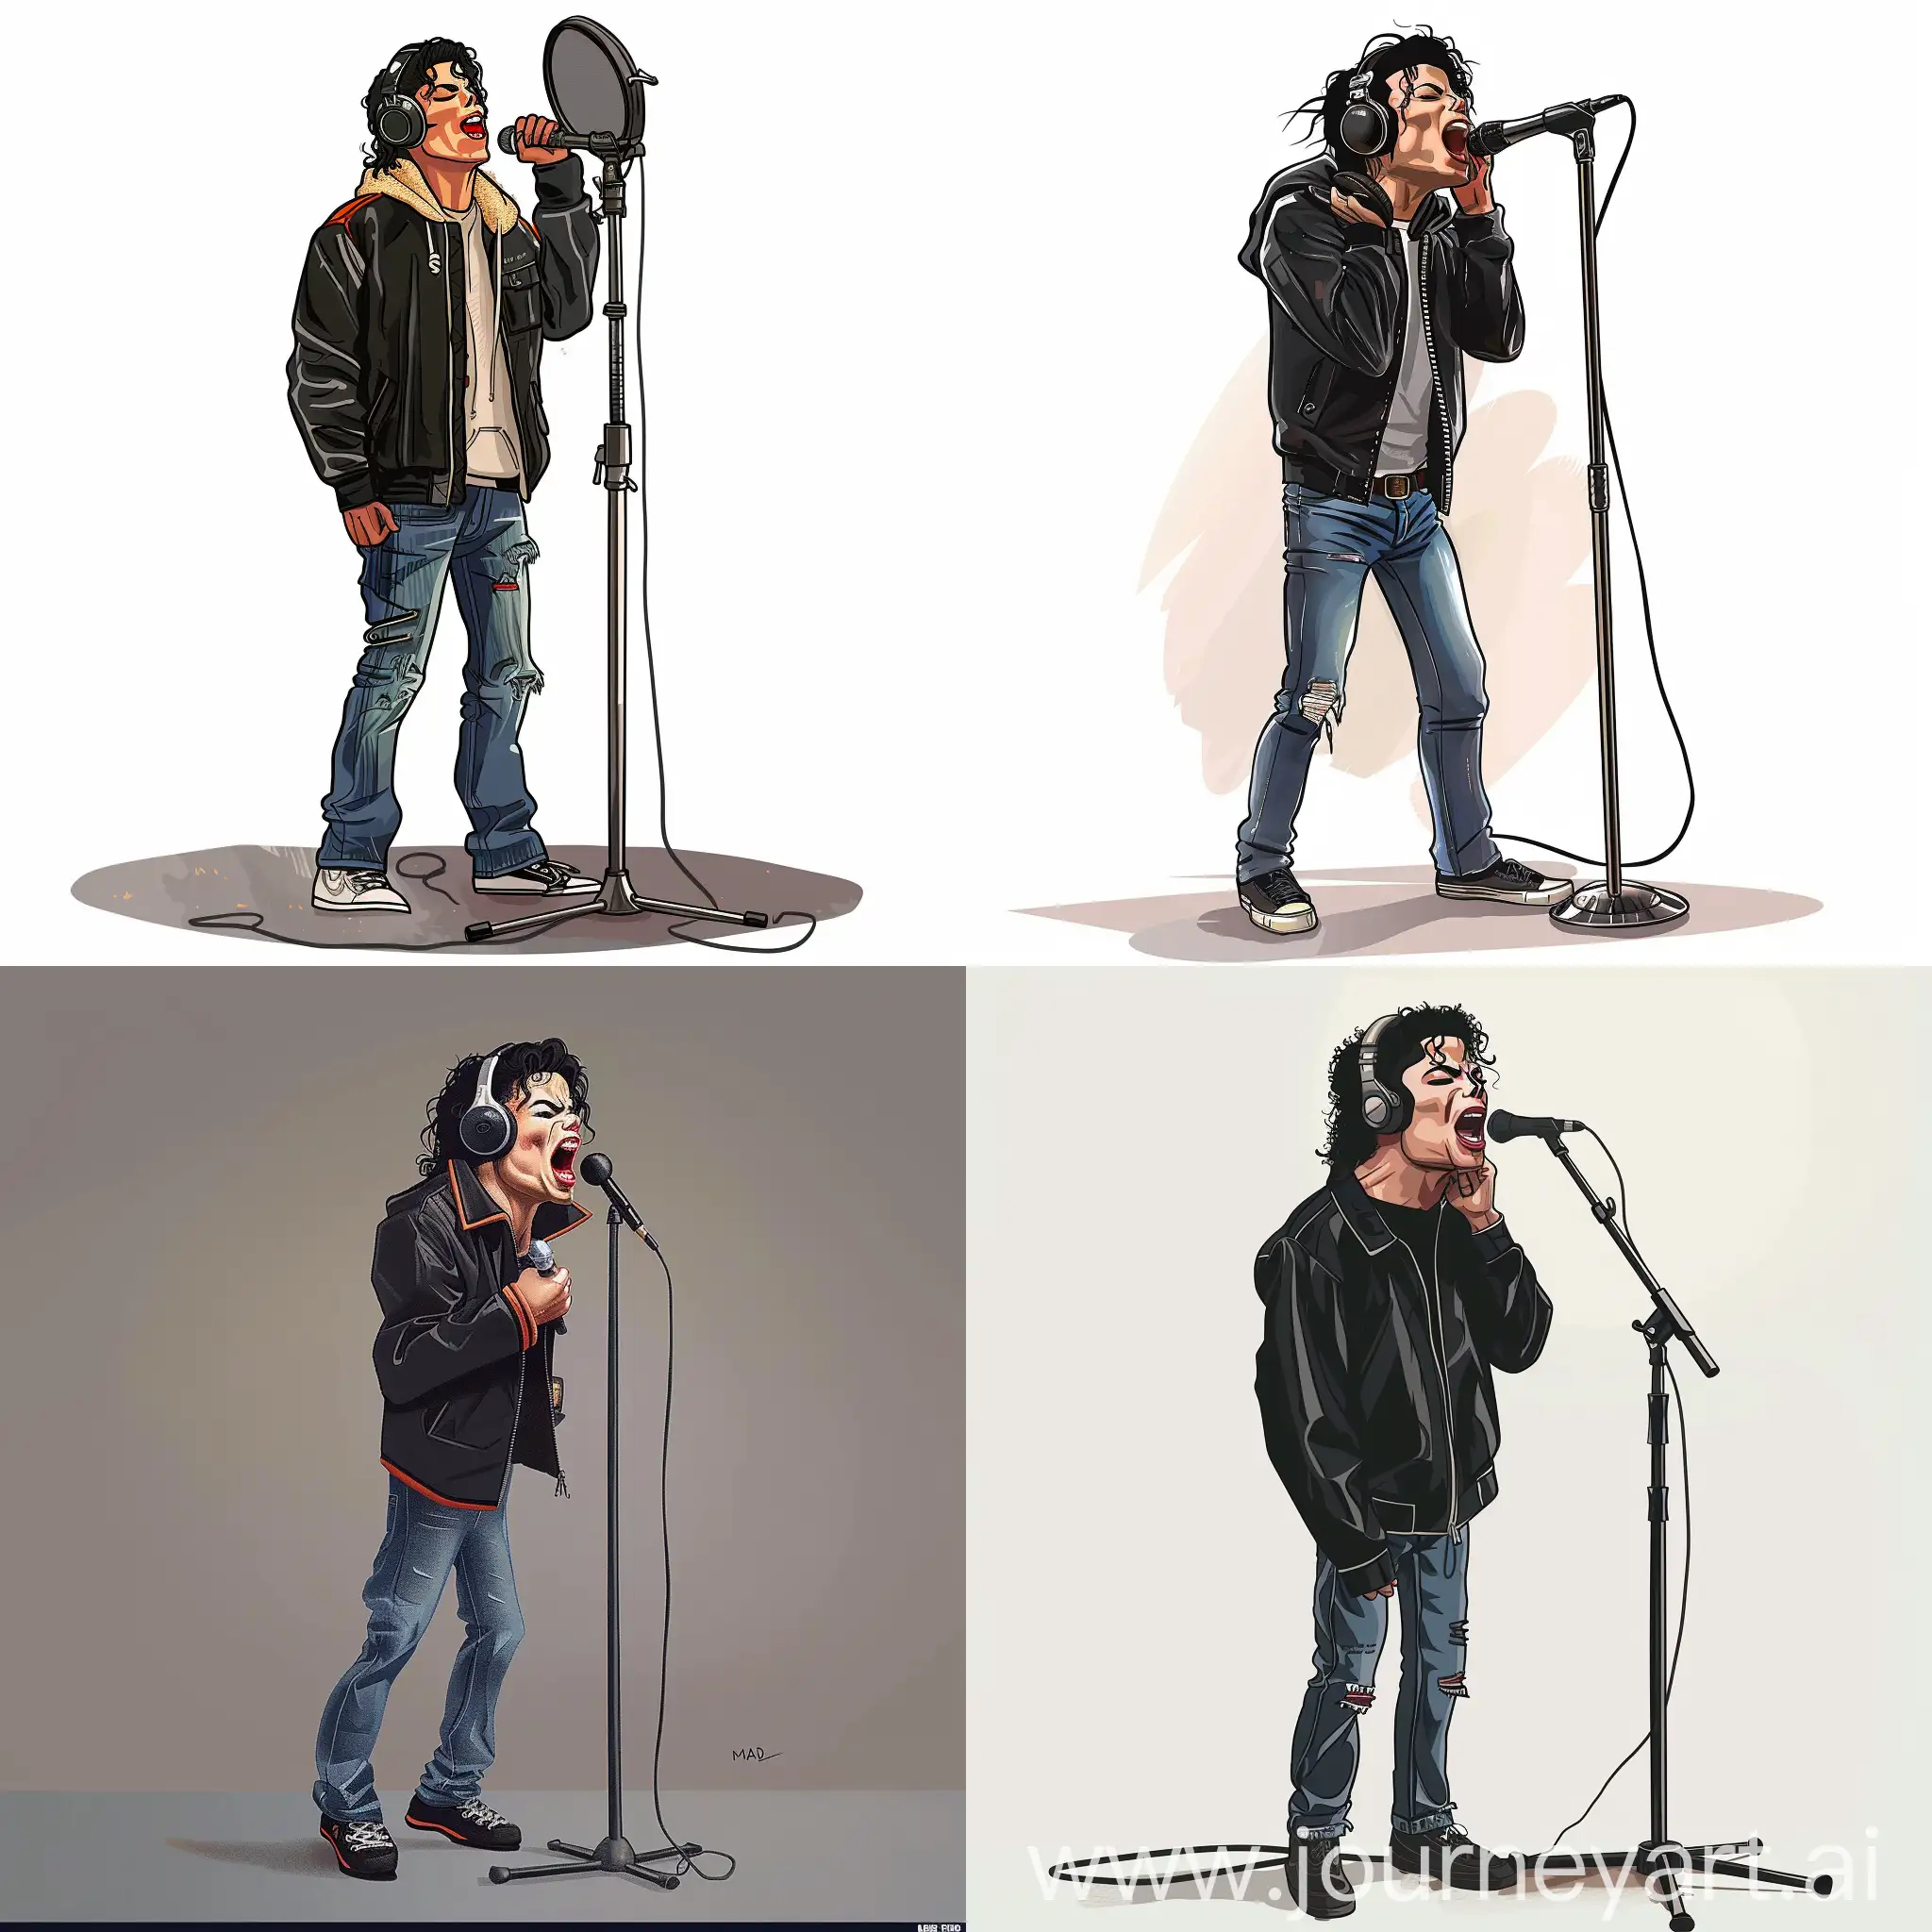 Caricature of singer Michael Jackson, 26 years old, with headphones, jeans, black jacket, standing singing with a stand microphone, MAD magazine style caricature.